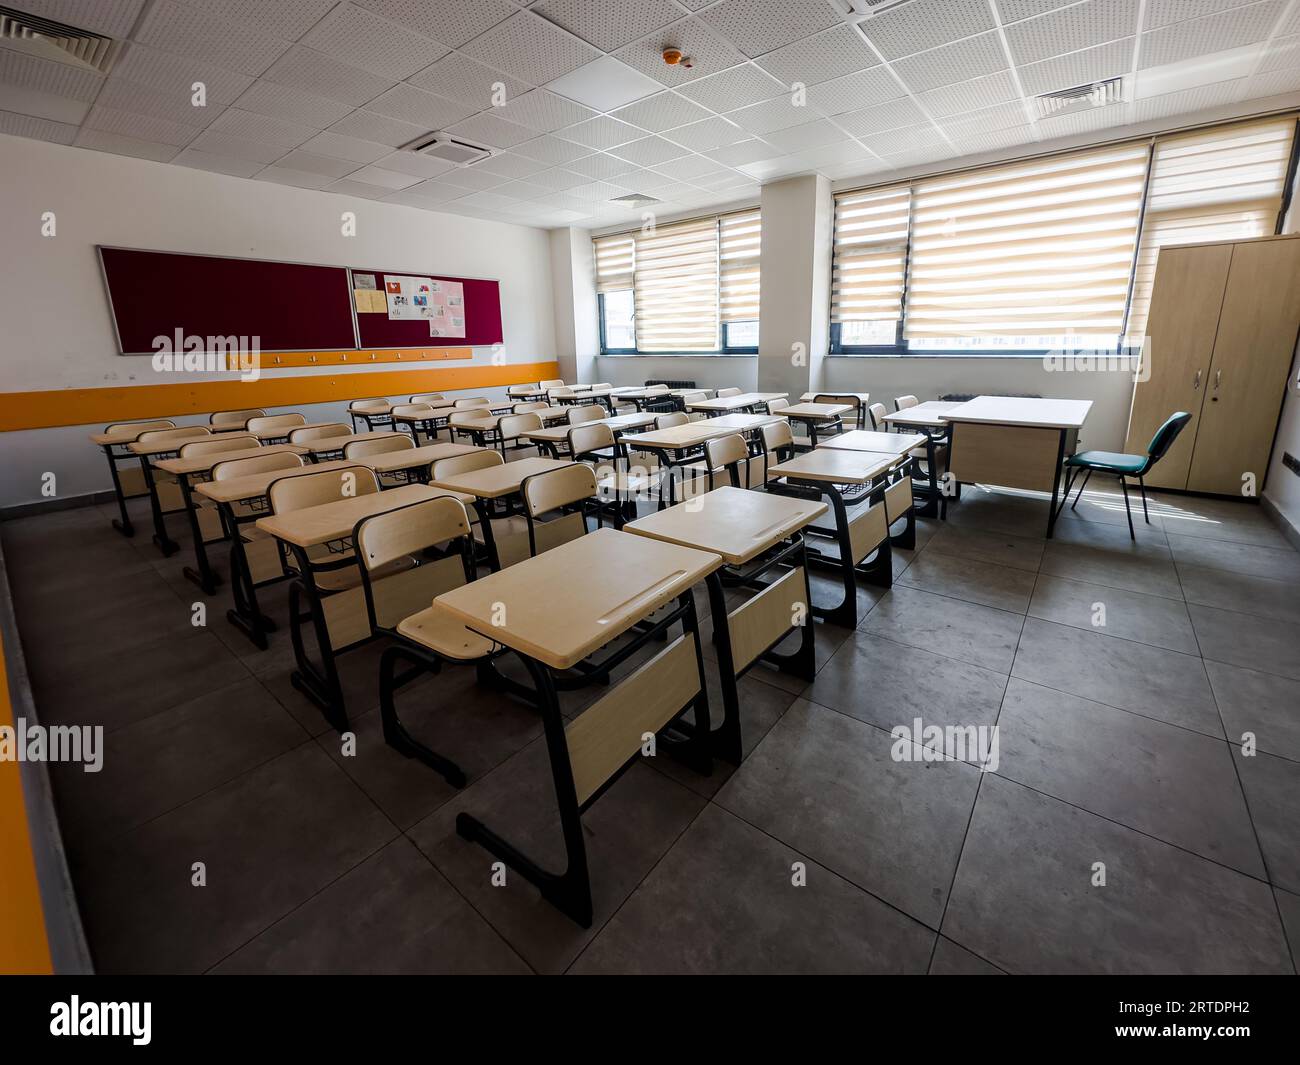 Classroom in background without ,No student or teacher . modern classroom environment. High quality photo Stock Photo